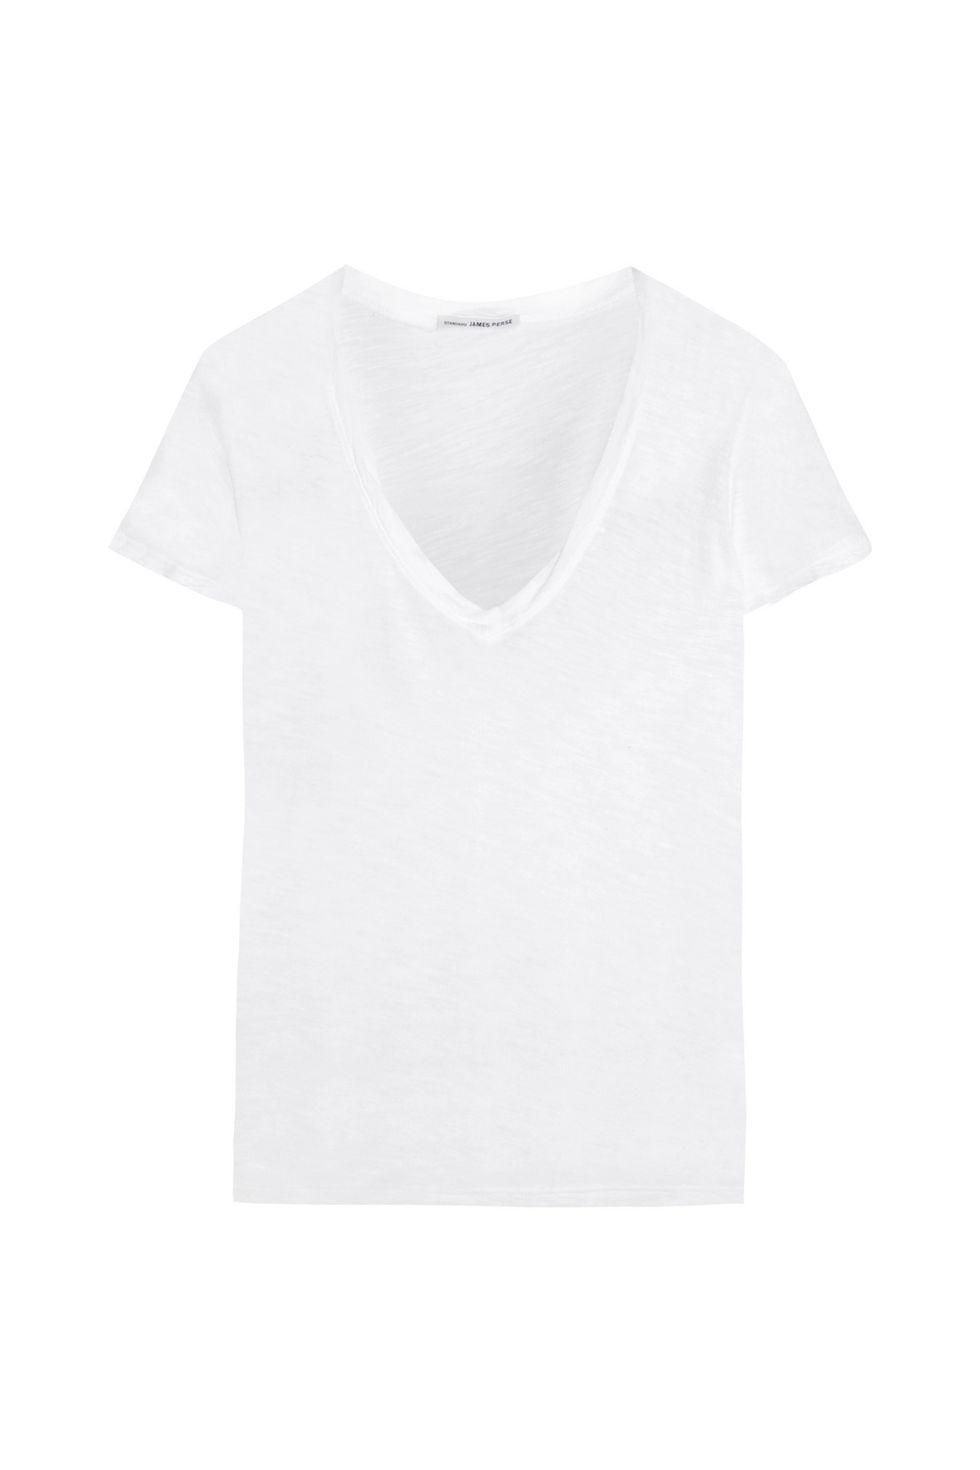 Best white t-shirt - james perse